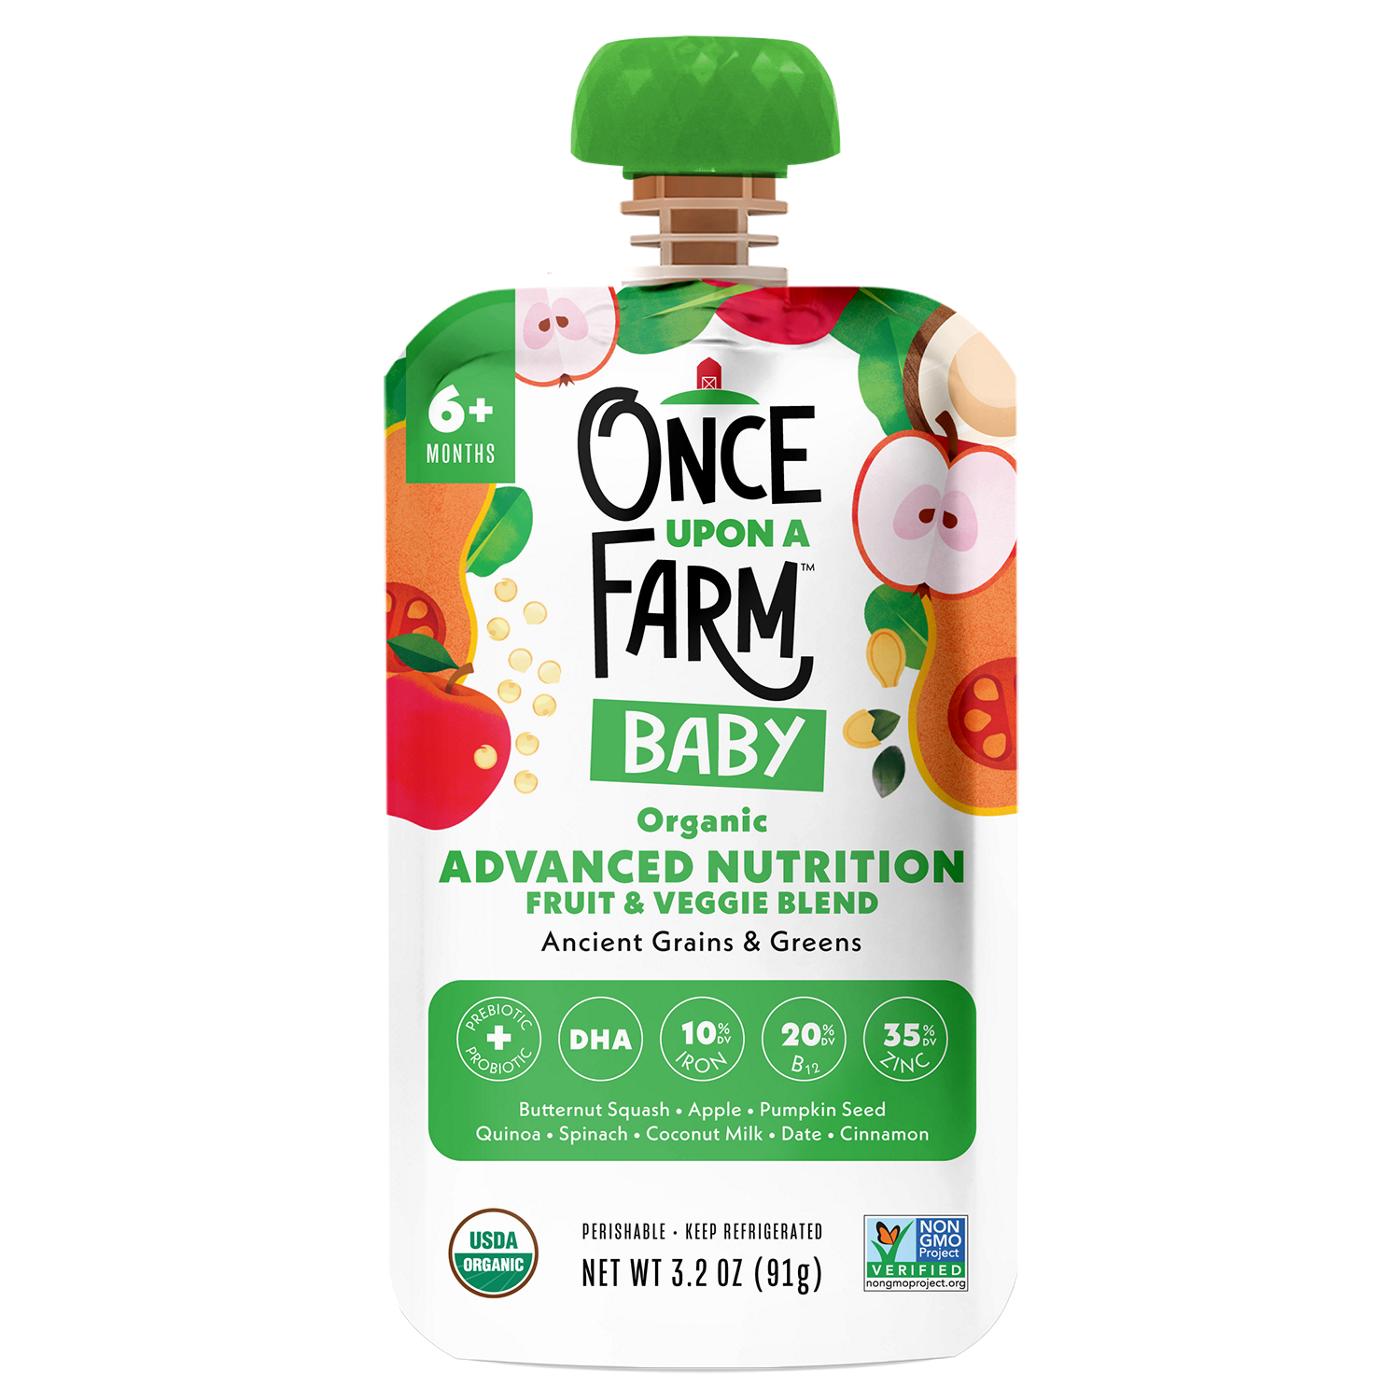 Once Upon a Farm Organic Advanced Nutrition Pouch - Ancient Grains & Greens; image 1 of 2